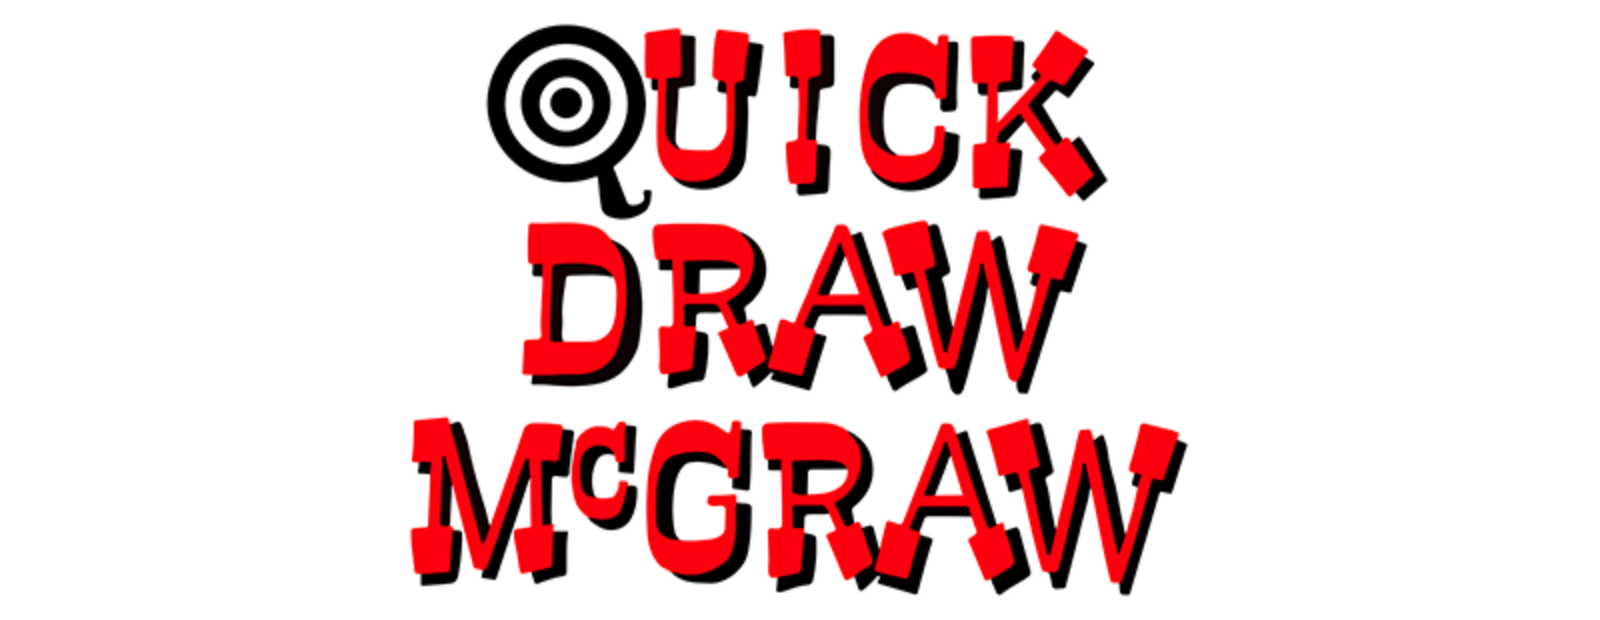 The Quick Draw McGraw Show (2 DVDs Box Set)